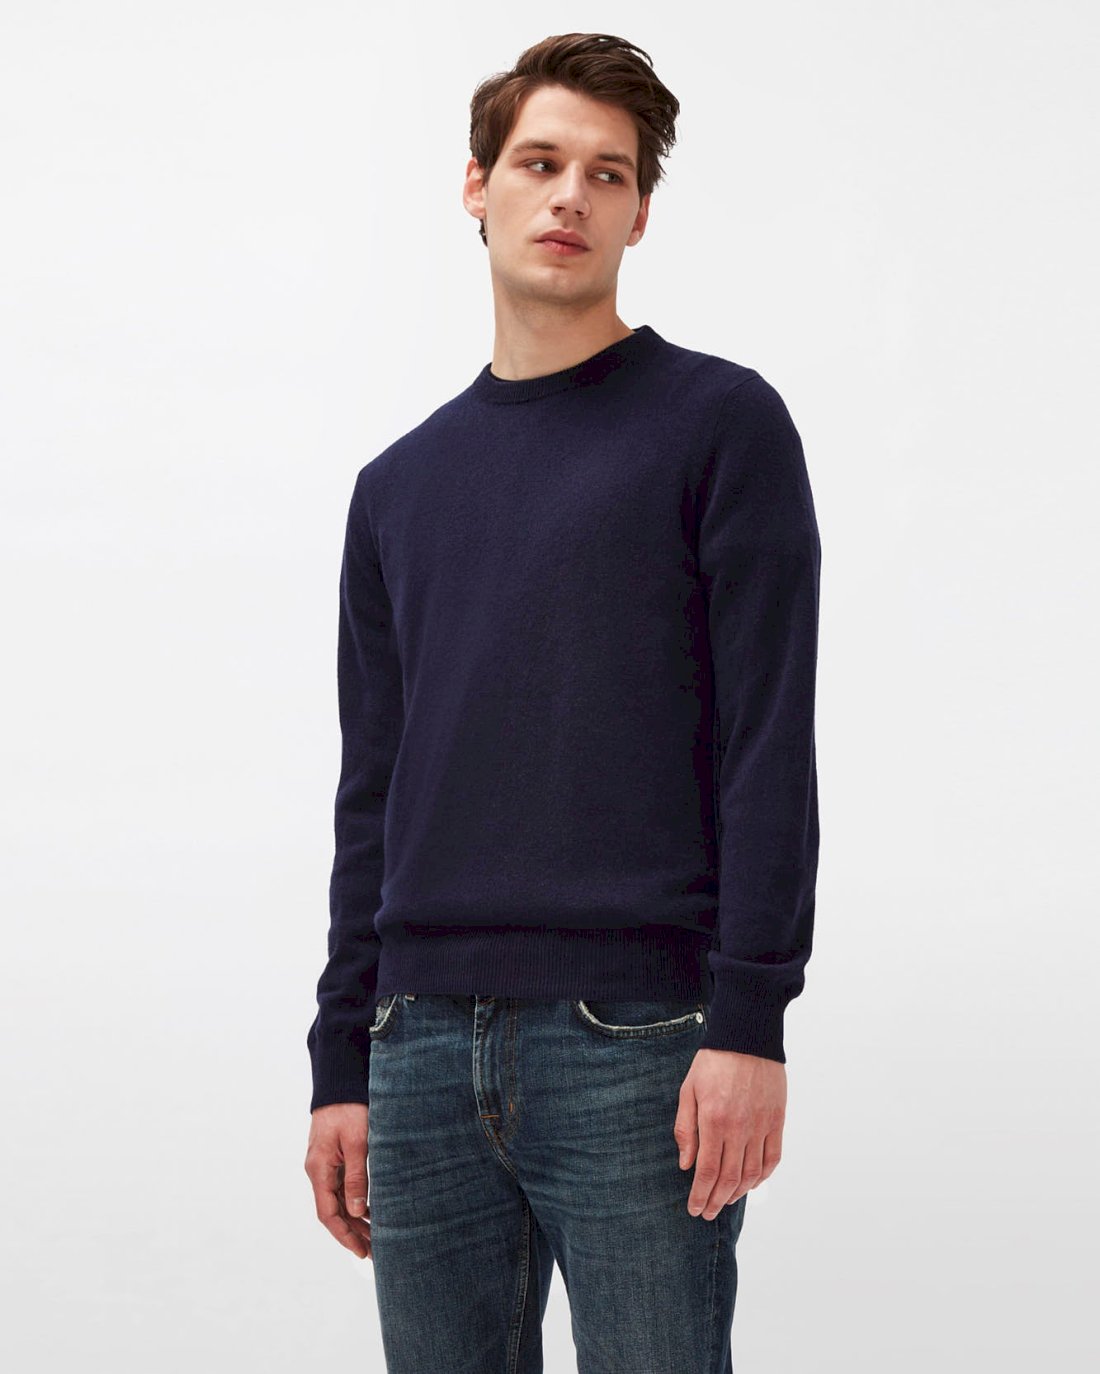 Cashmere Crew in Navy | 7 For All Mankind